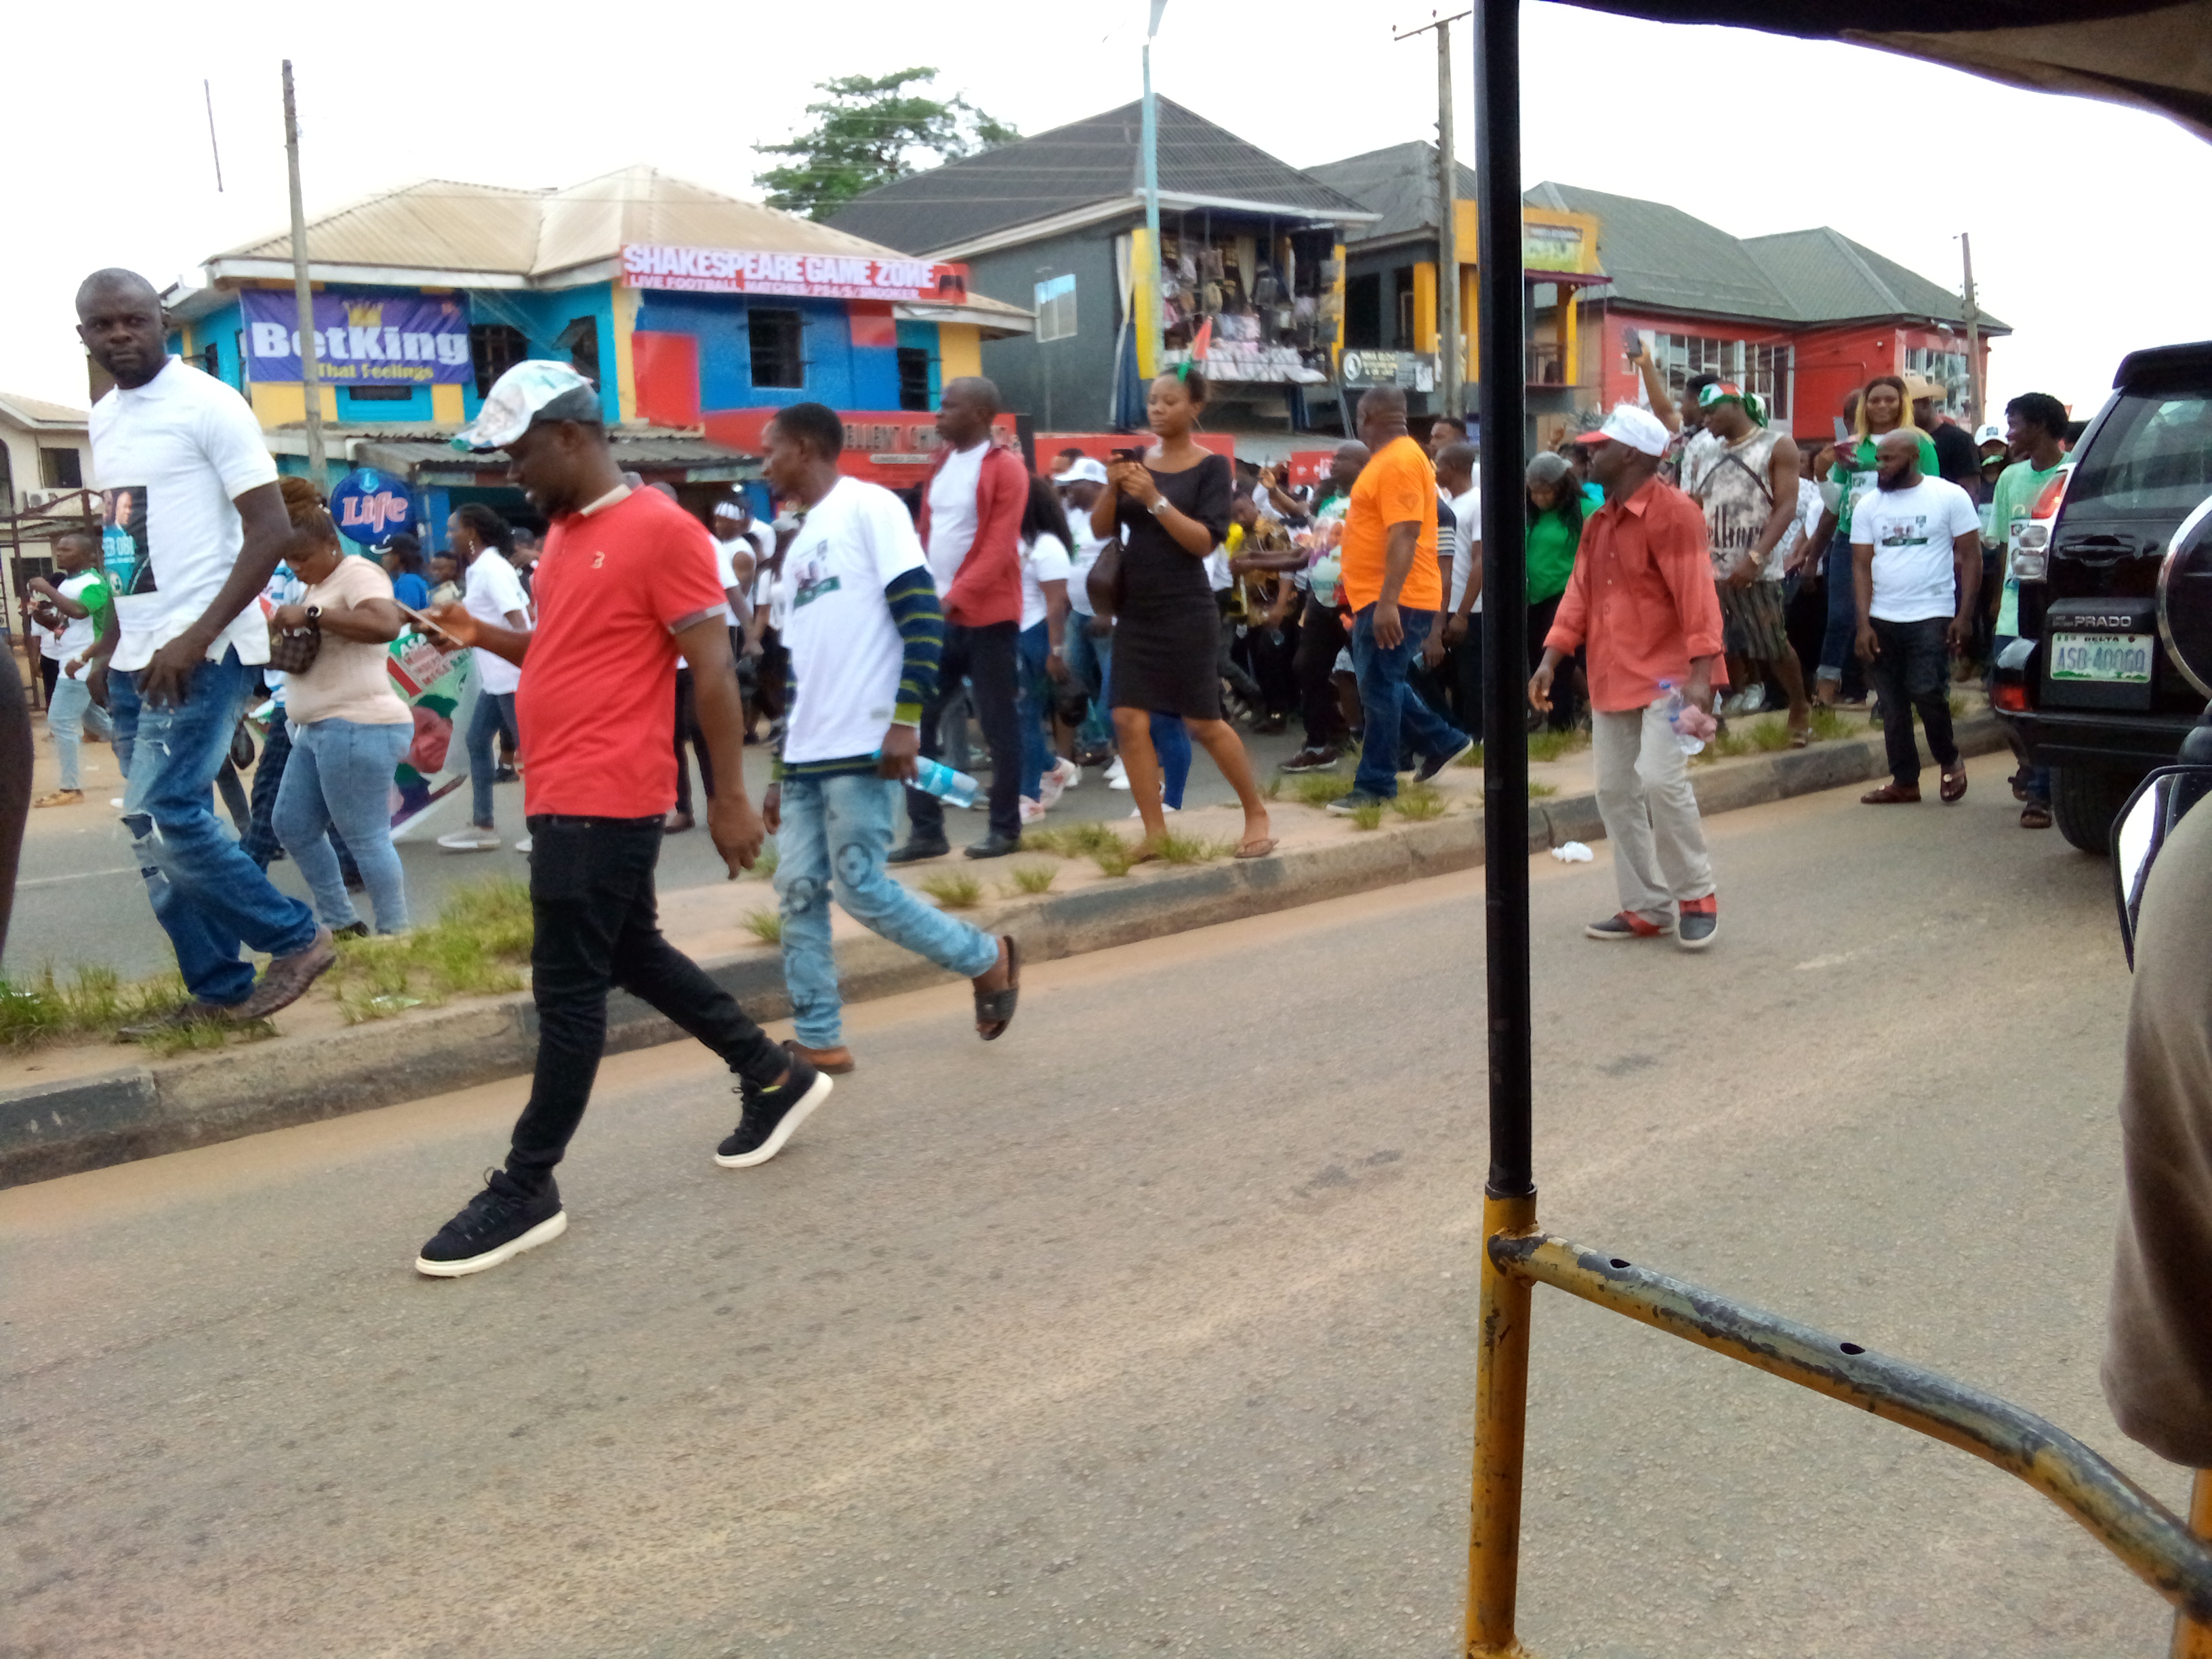 Asaba stands still for OBI-dients in an OBIDATTI presidential procession support rally